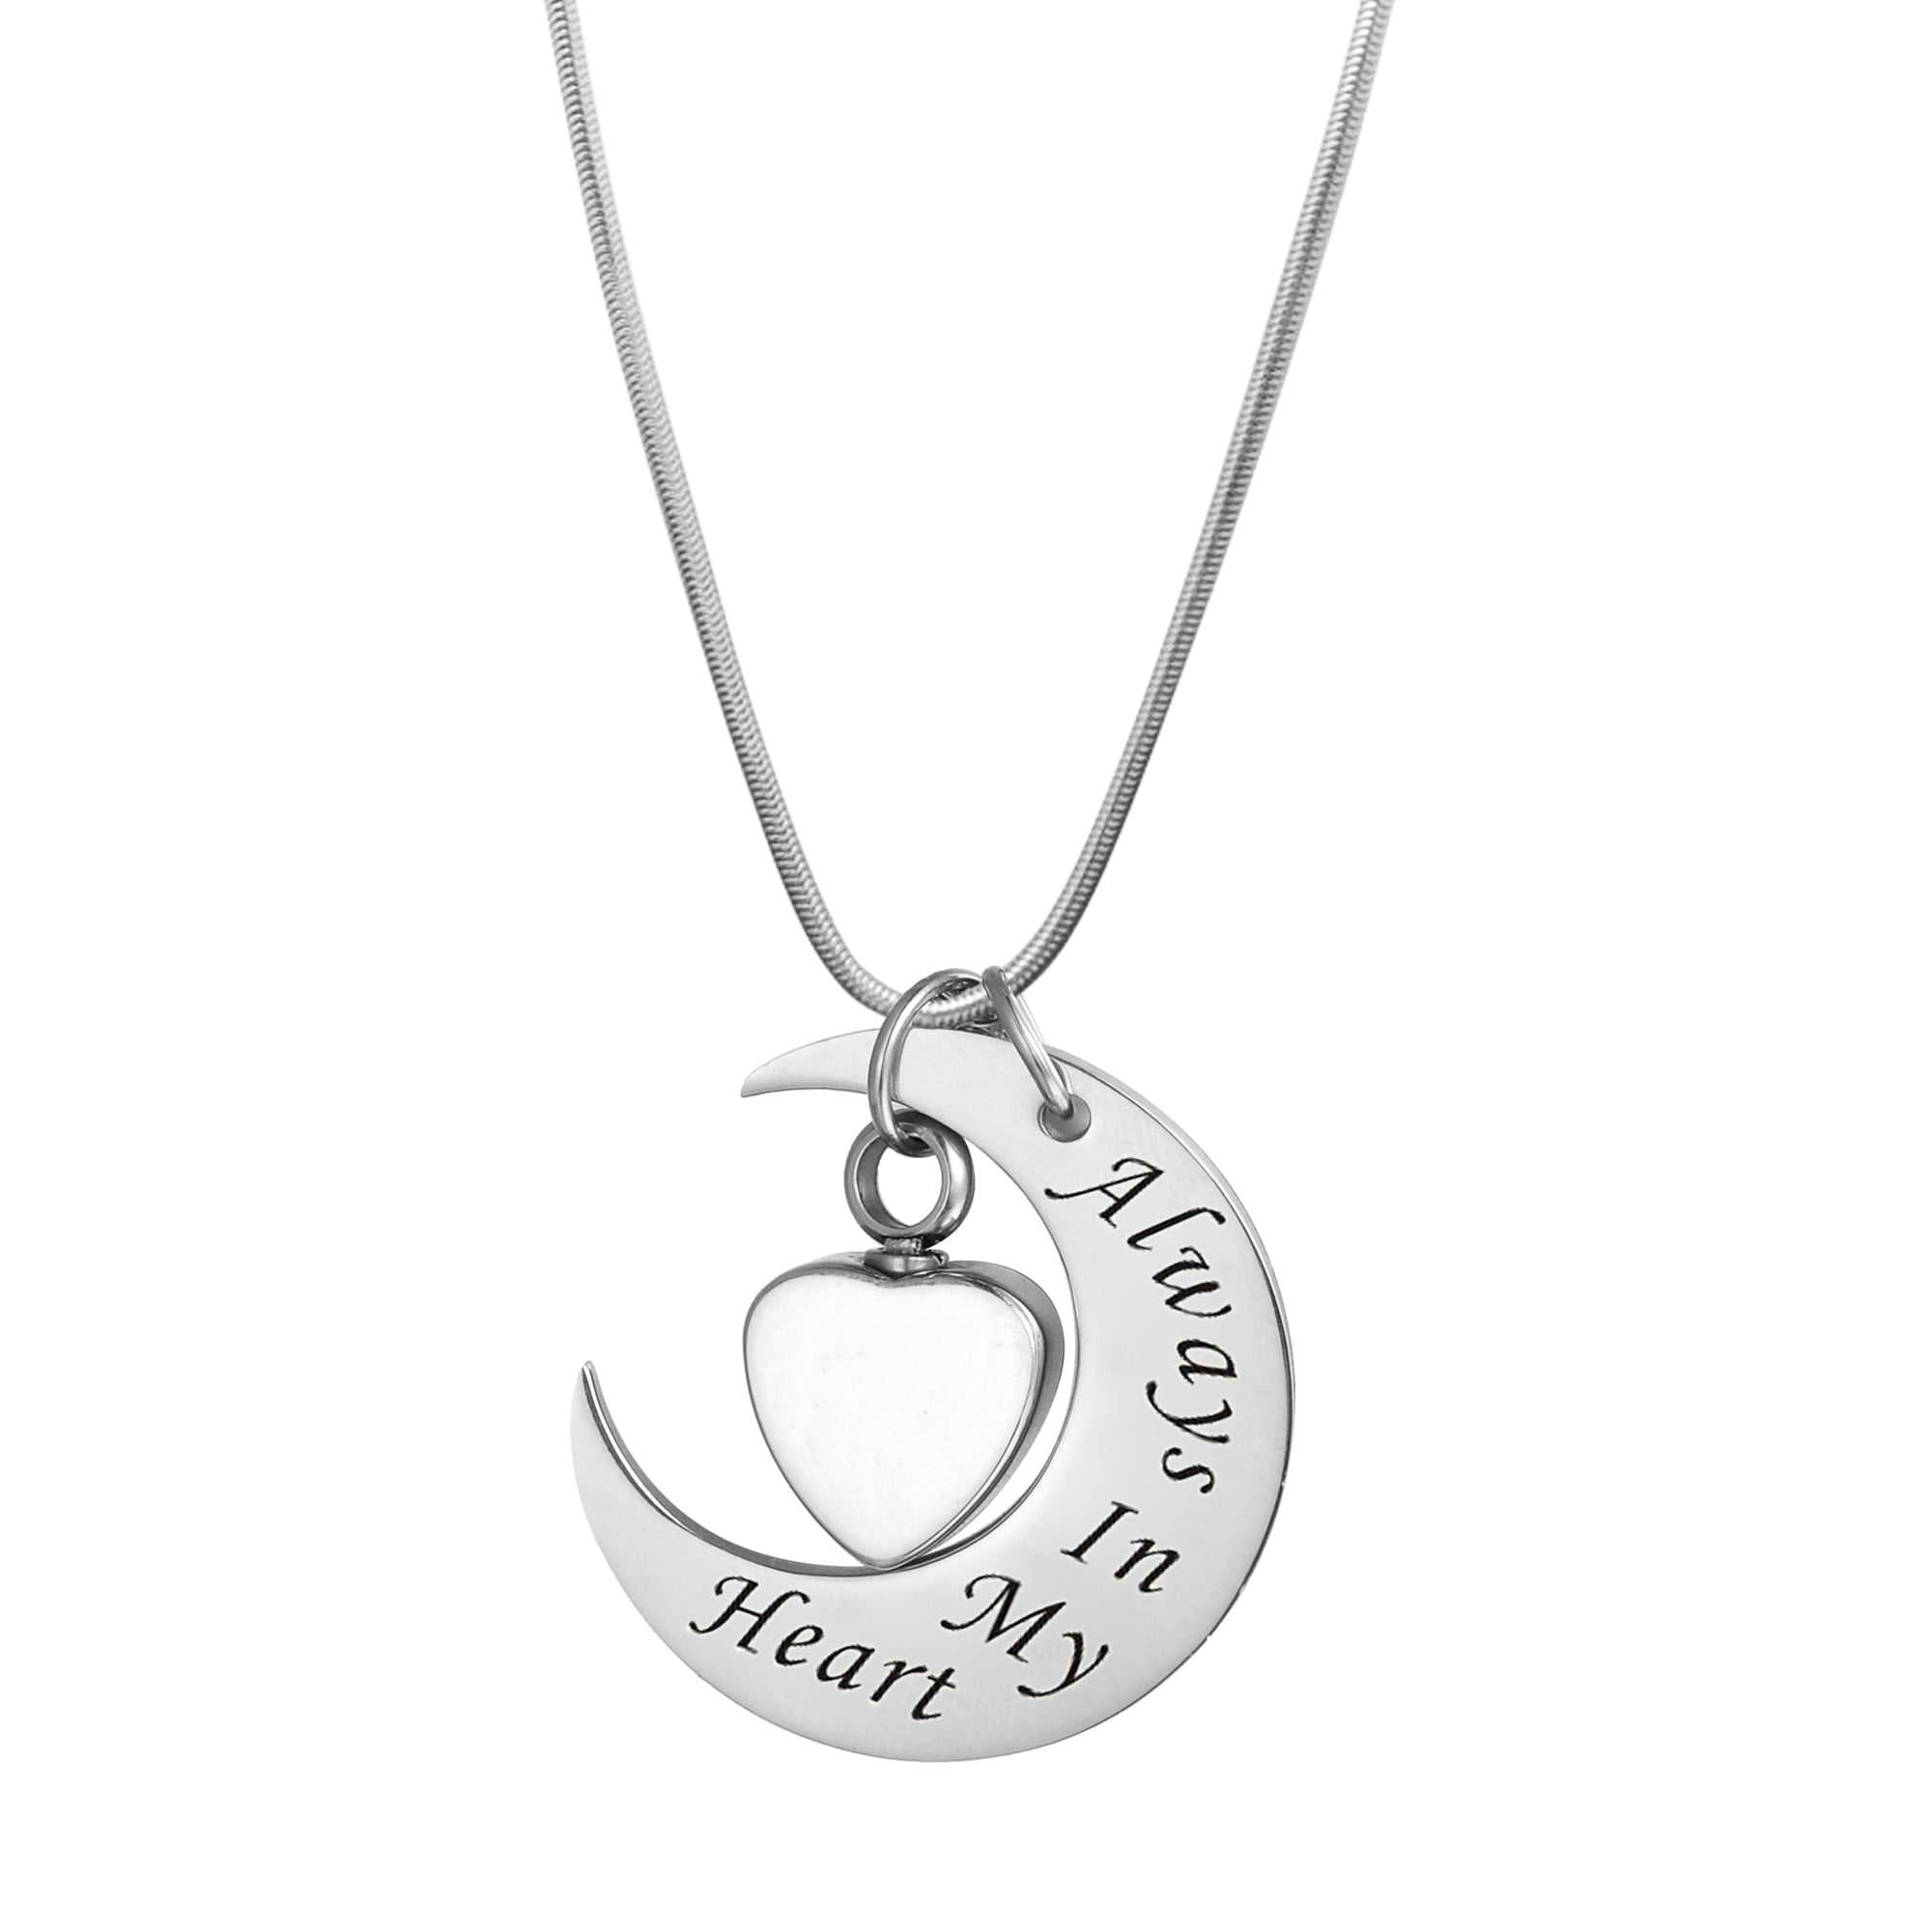 WK Carved Teardrop Keepsake Ashes Necklace I Love You to The Moon and Back Urn Pendant Cremation Memorial Jewelry